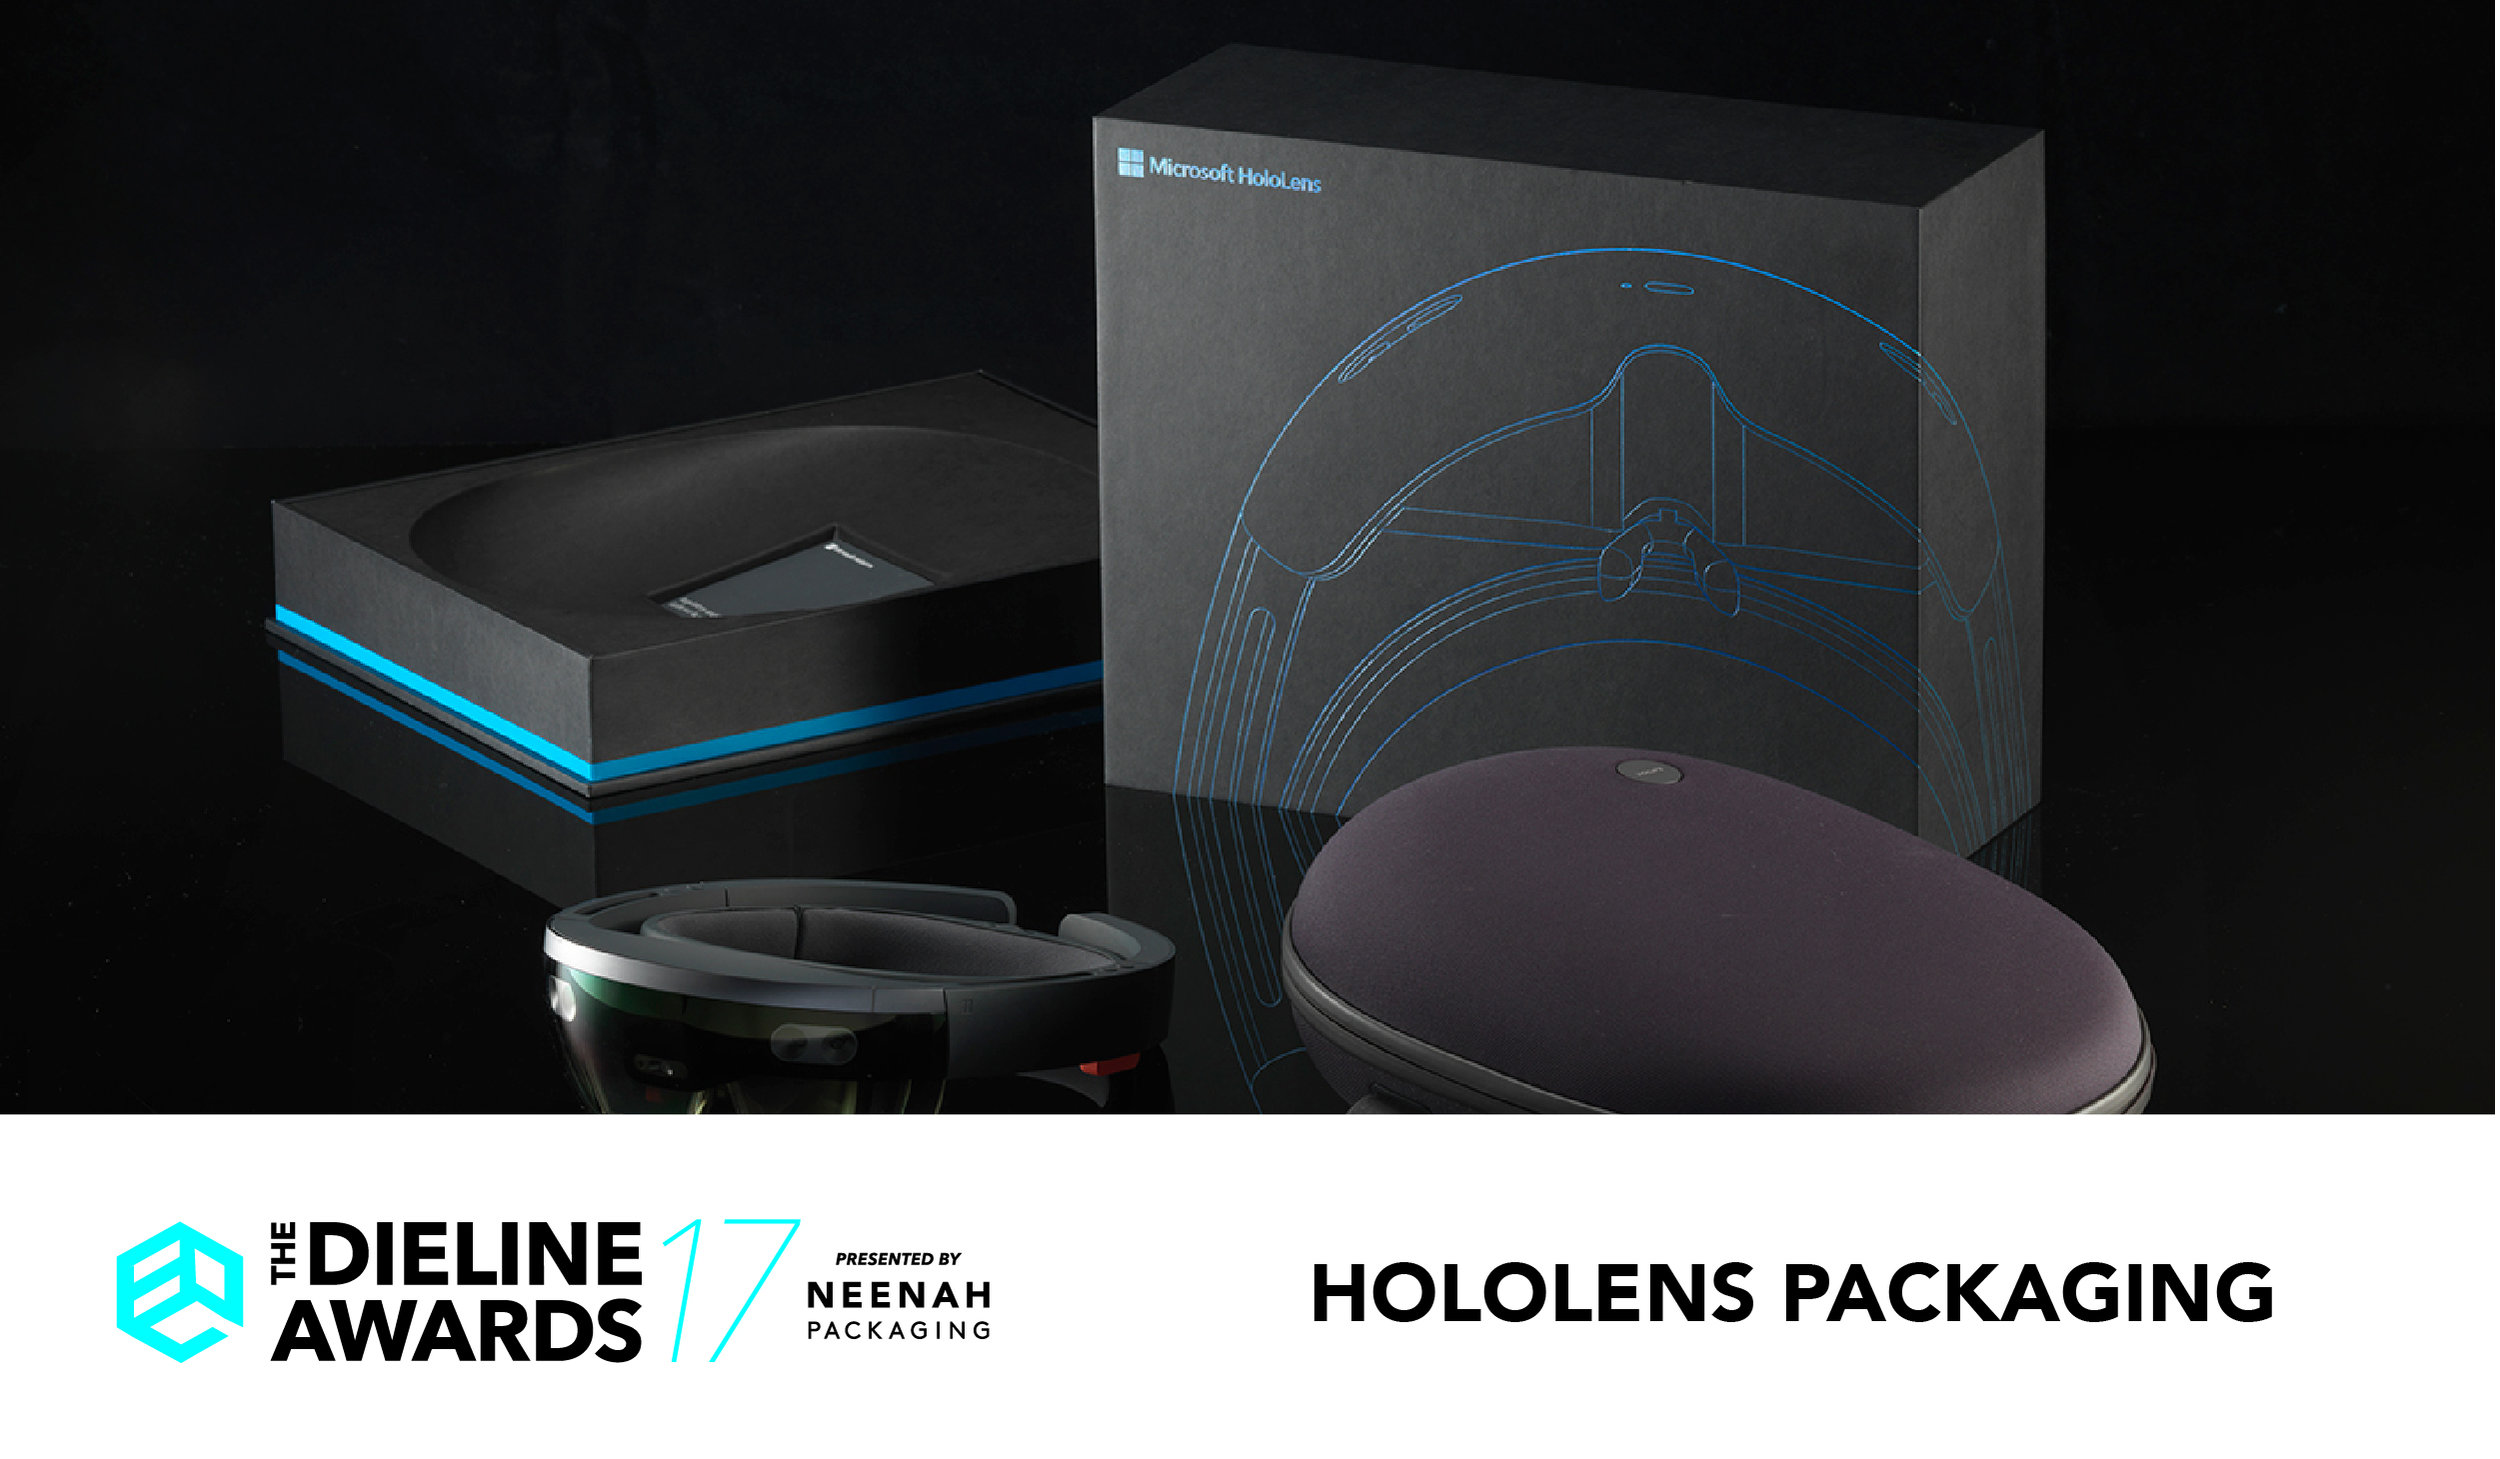 The Dieline Awards 2017 Outstanding Achievements: Hololens Packaging